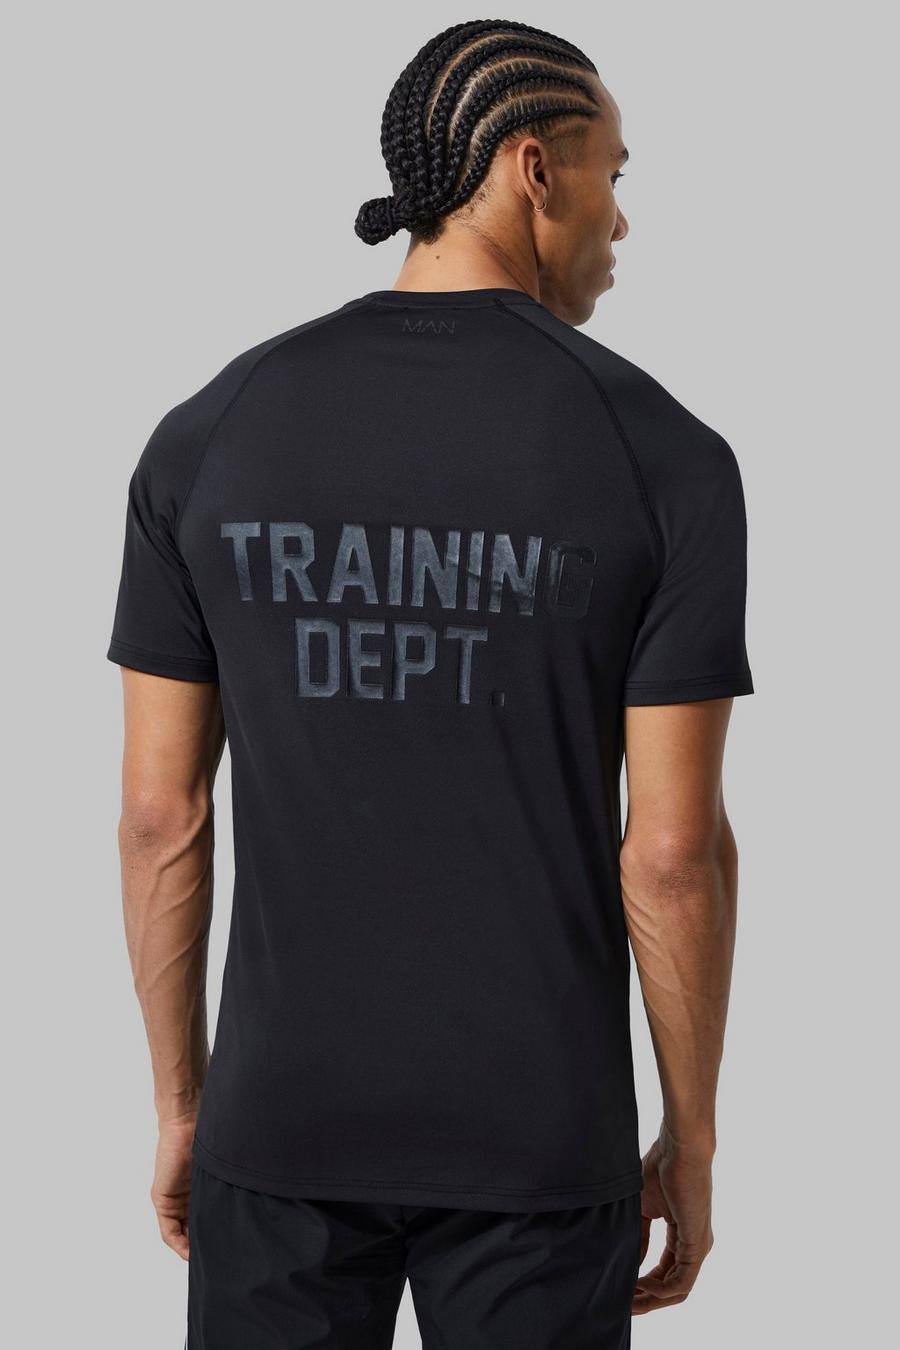 Tall Muscle-Fit Trainings Dept Muscle-Fit T-Shirt, Black noir